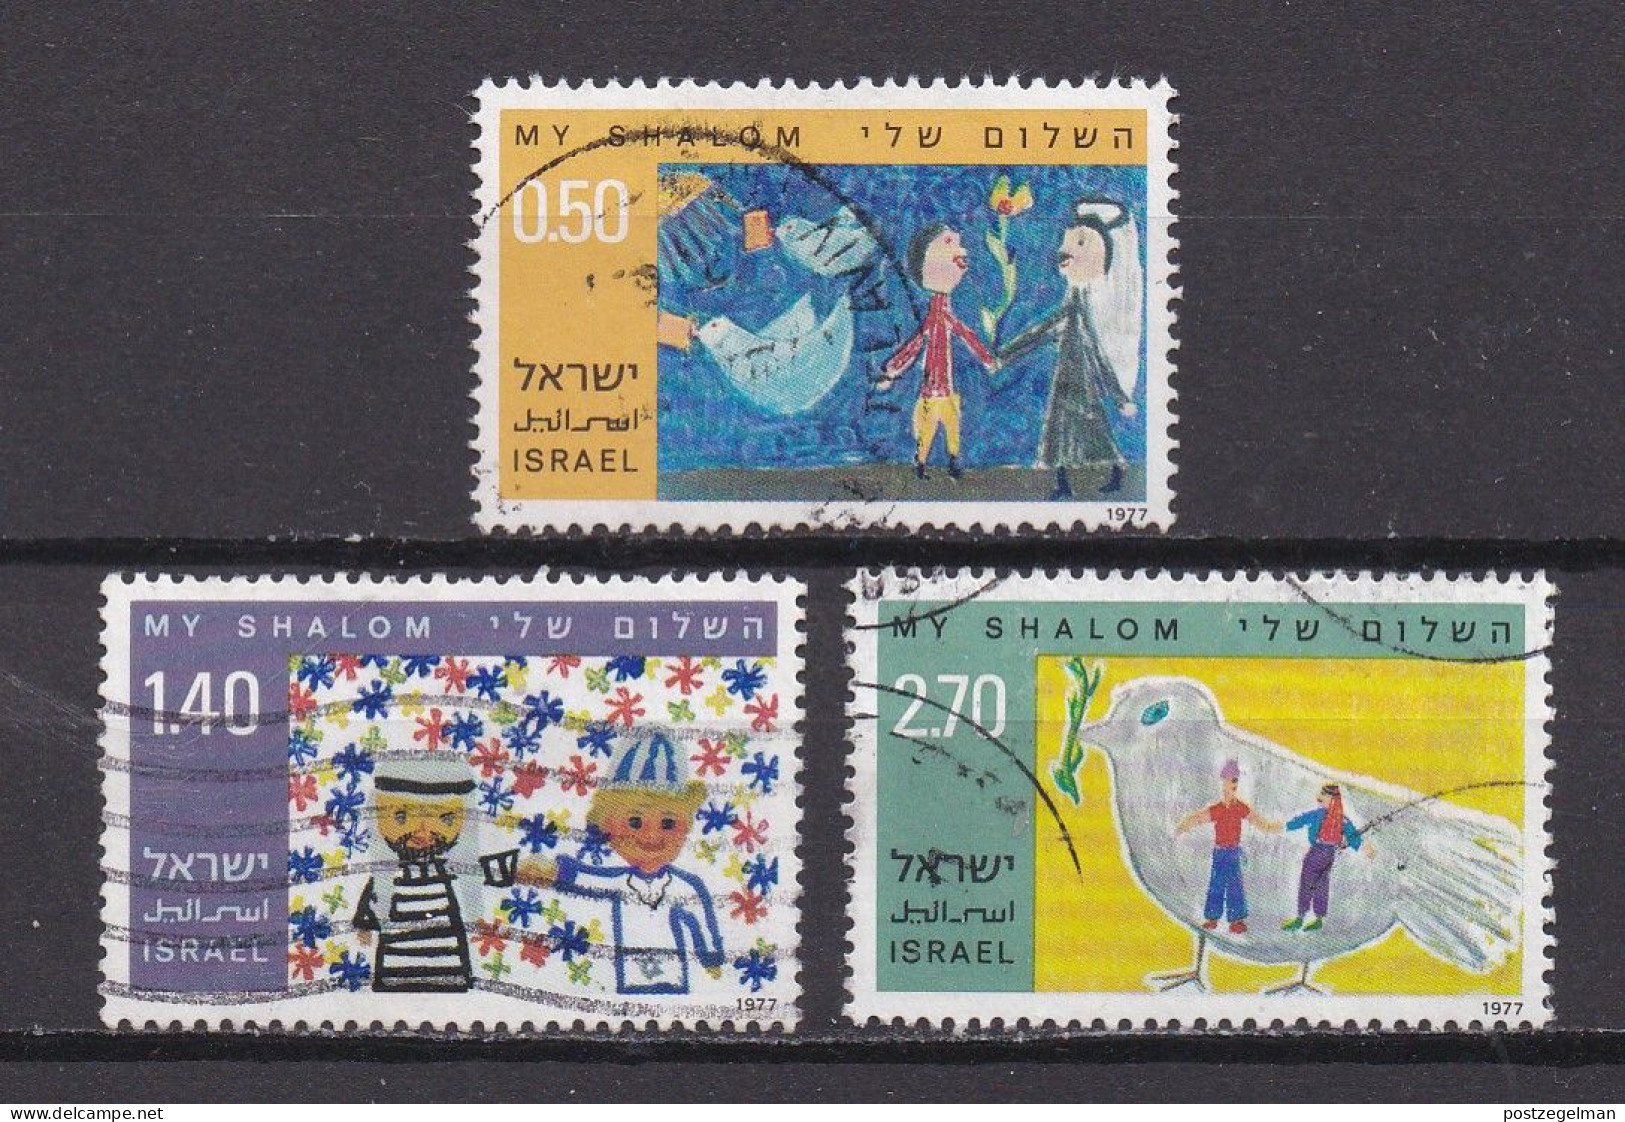 ISRAEL, 1977, Used Stamp(s)  Without  Tab, Children's Drawings, SG Number(s) 659-661, Scannr. 19078 - Gebraucht (ohne Tabs)